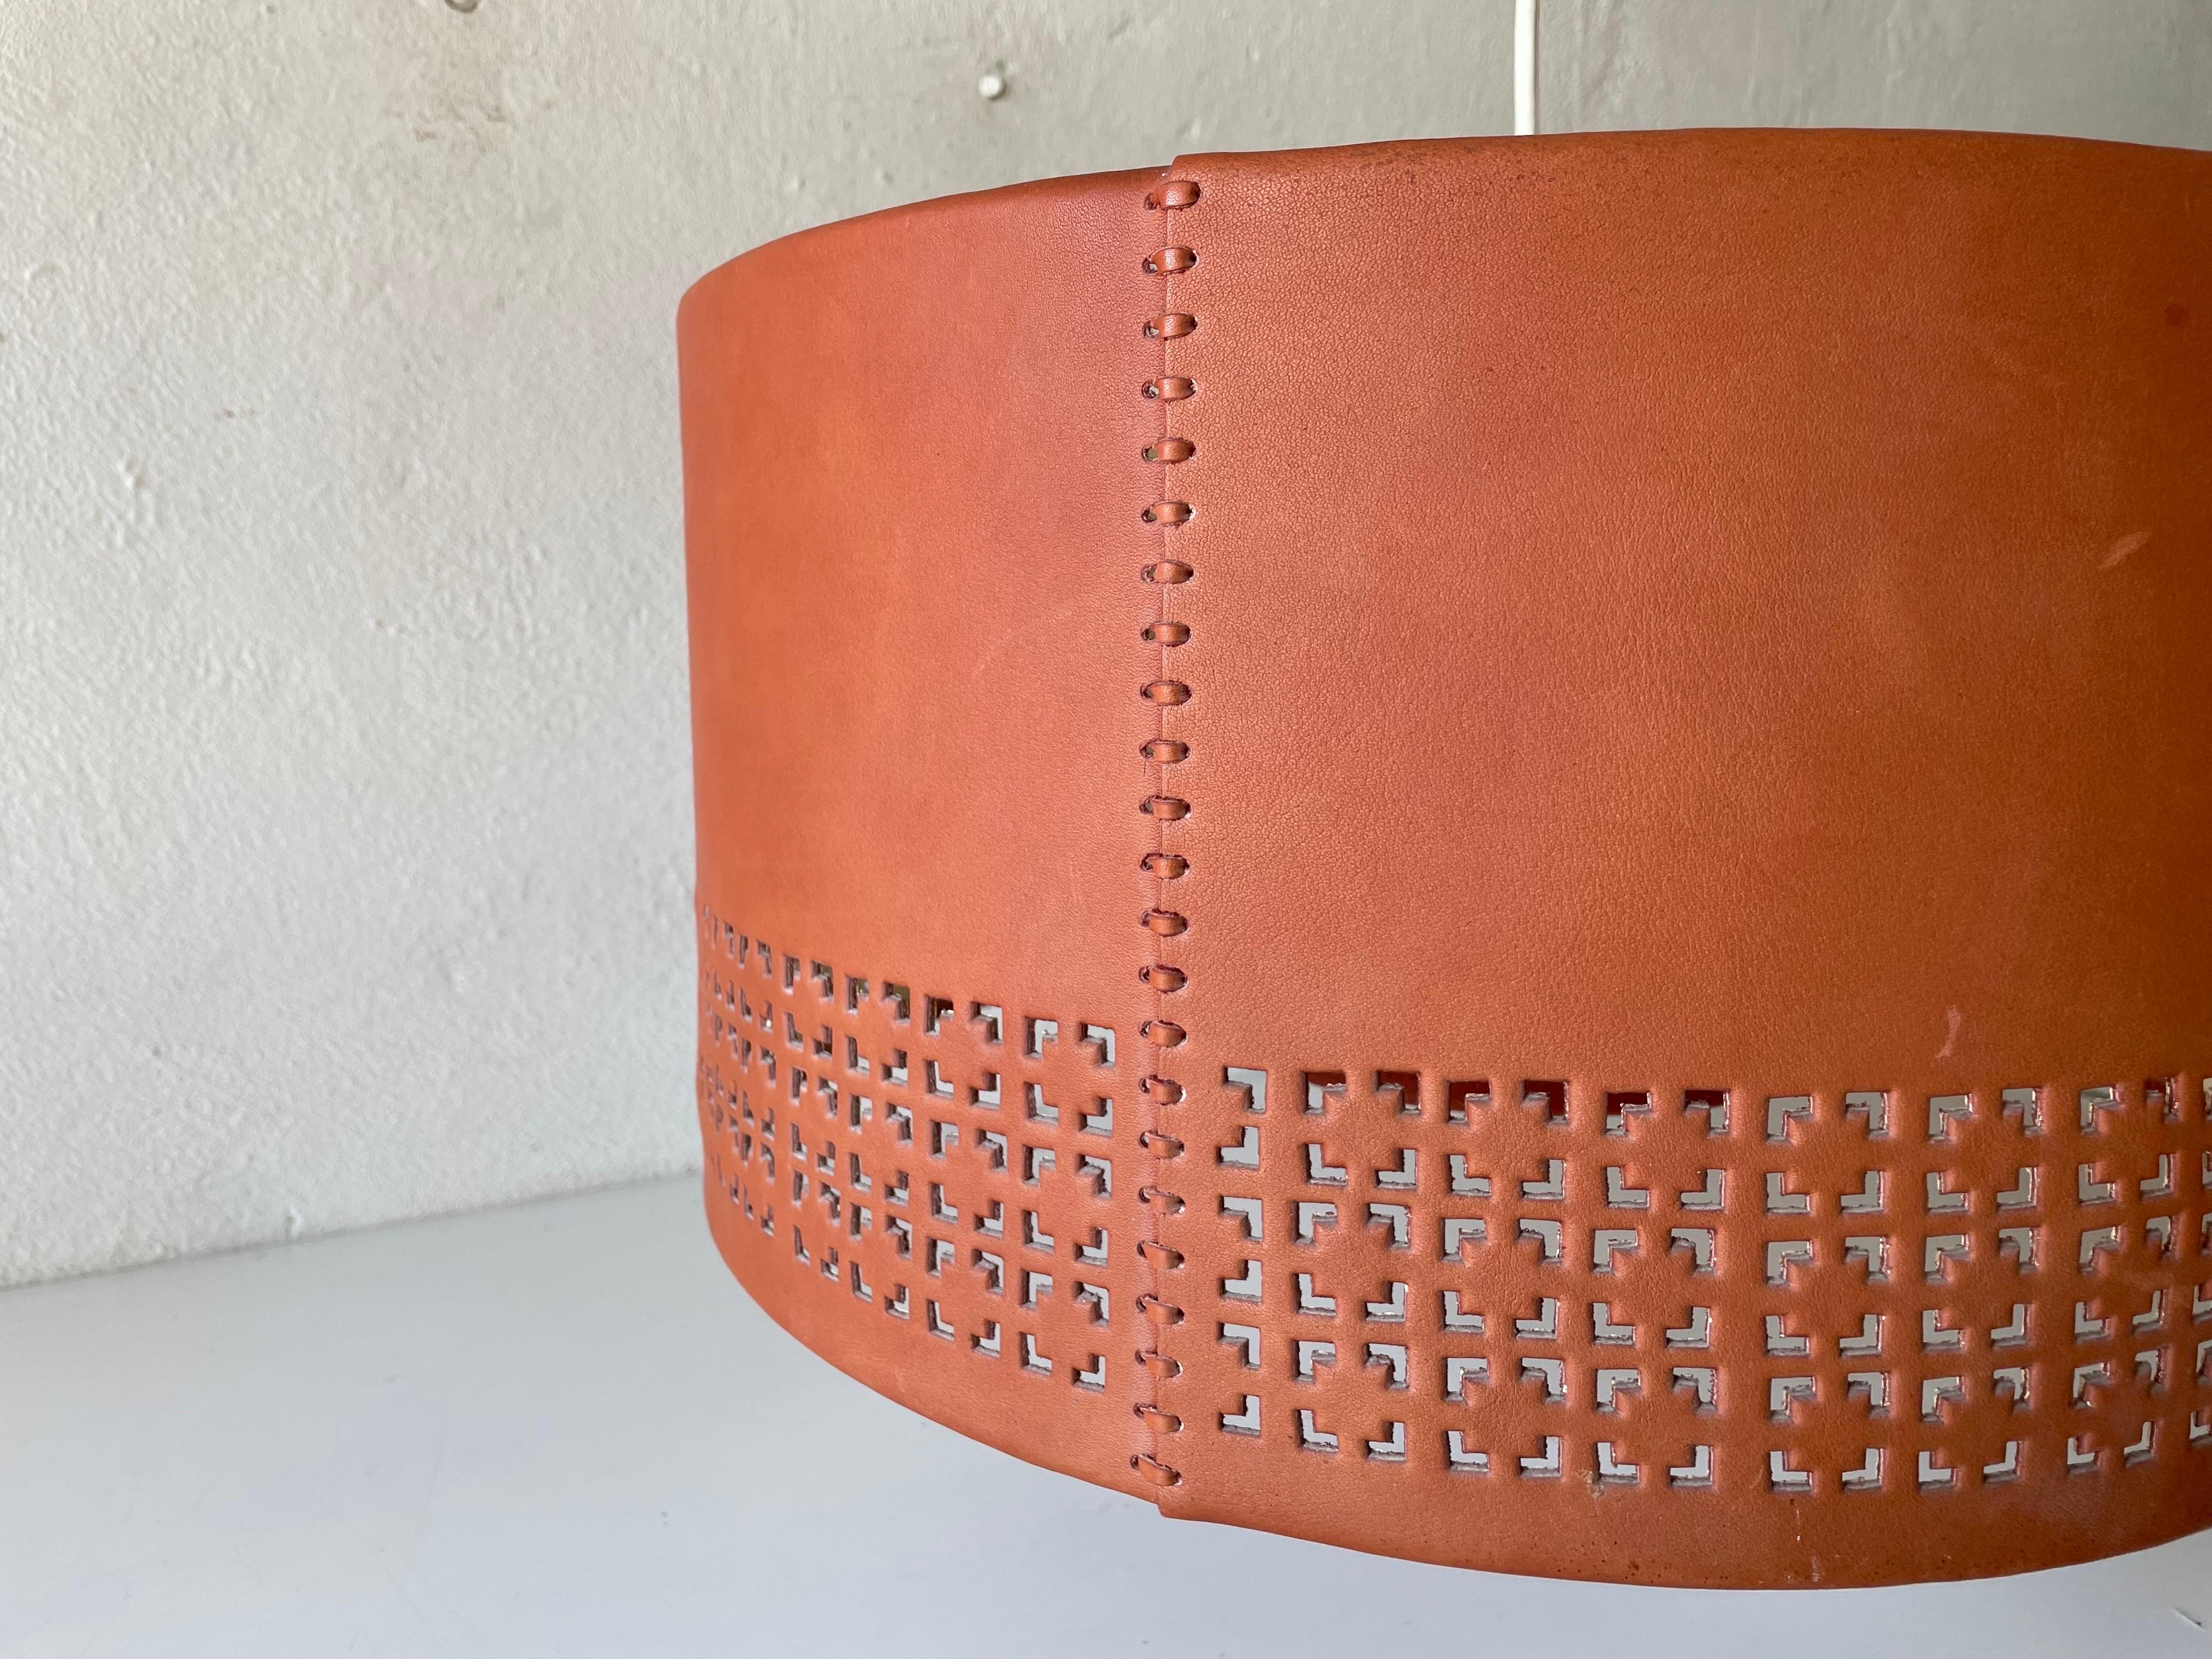 Cylindrical Leather Shade with Motifs Counterweight Pendant Lamp, 1960s, Germany For Sale 14